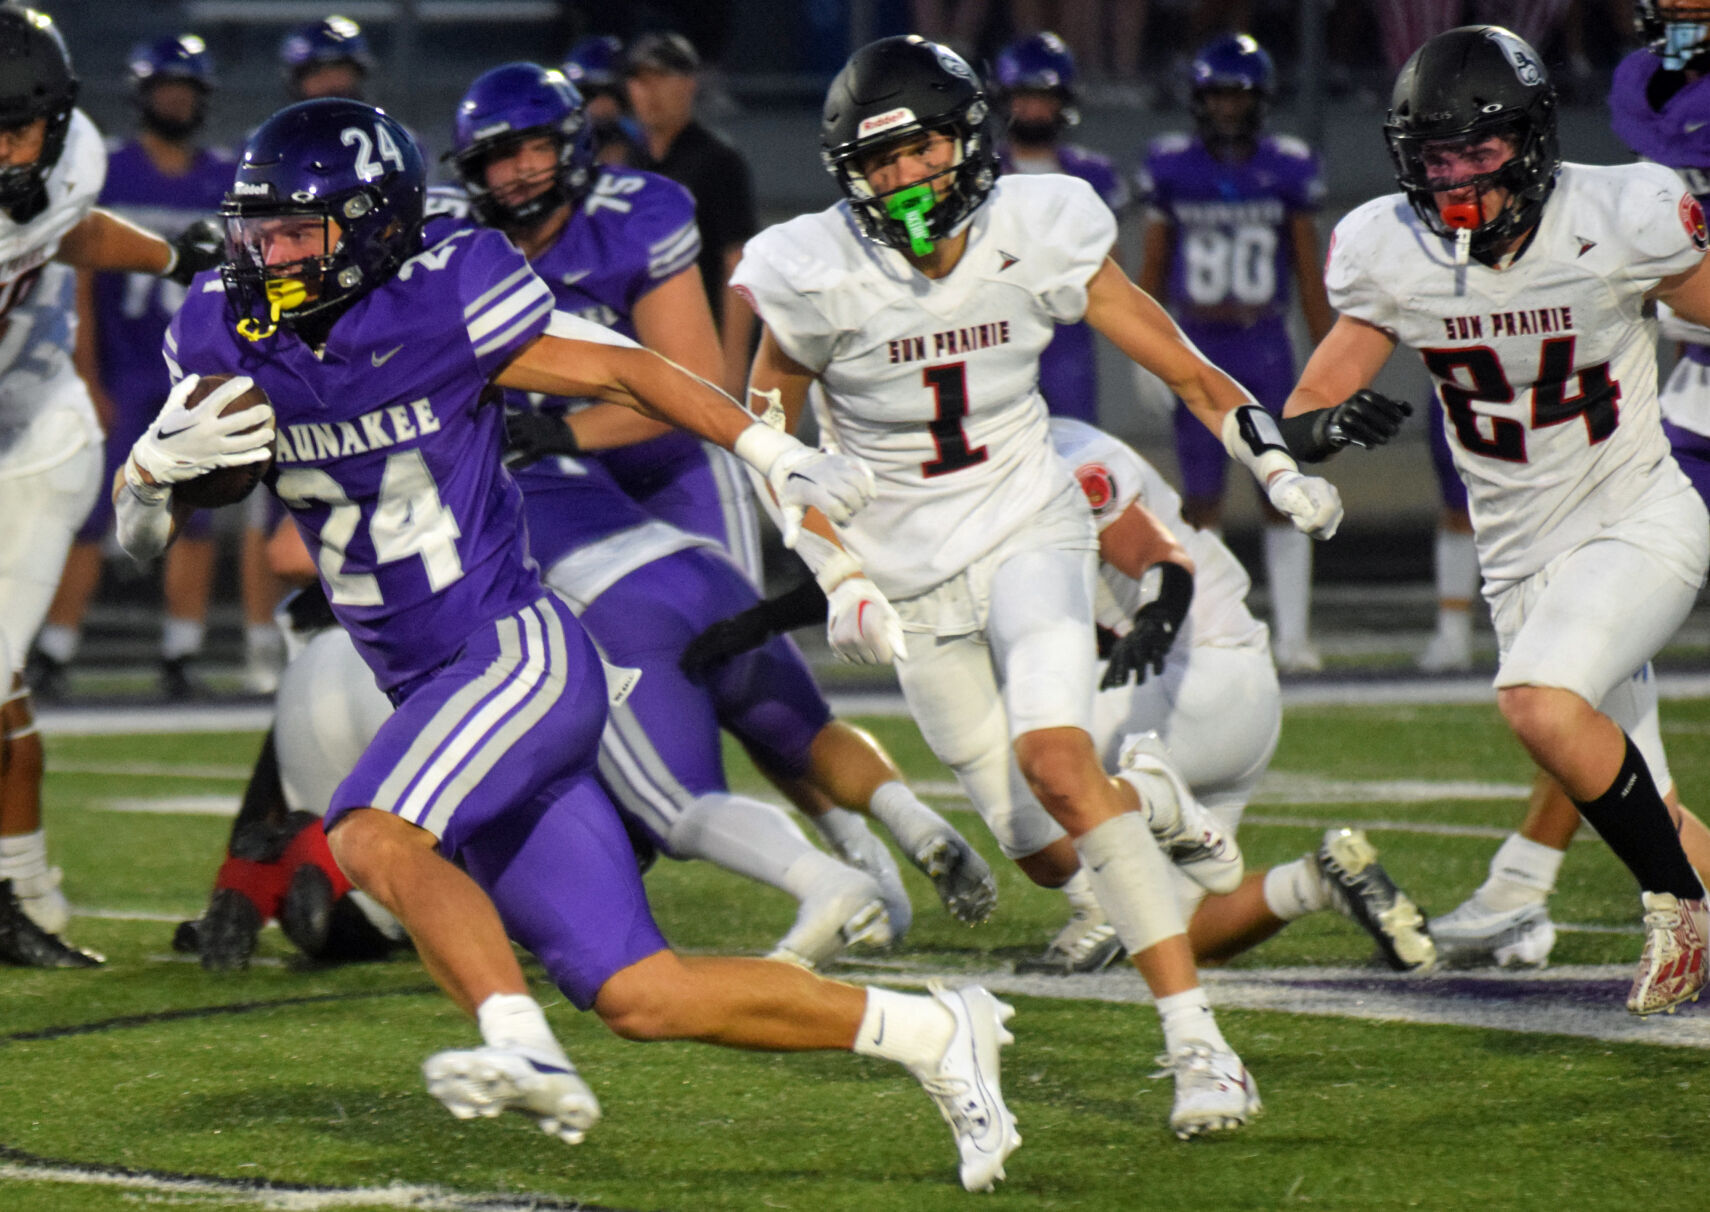 Waunakee Claims Top Spot in Madison/WiscNews High School Football Rankings